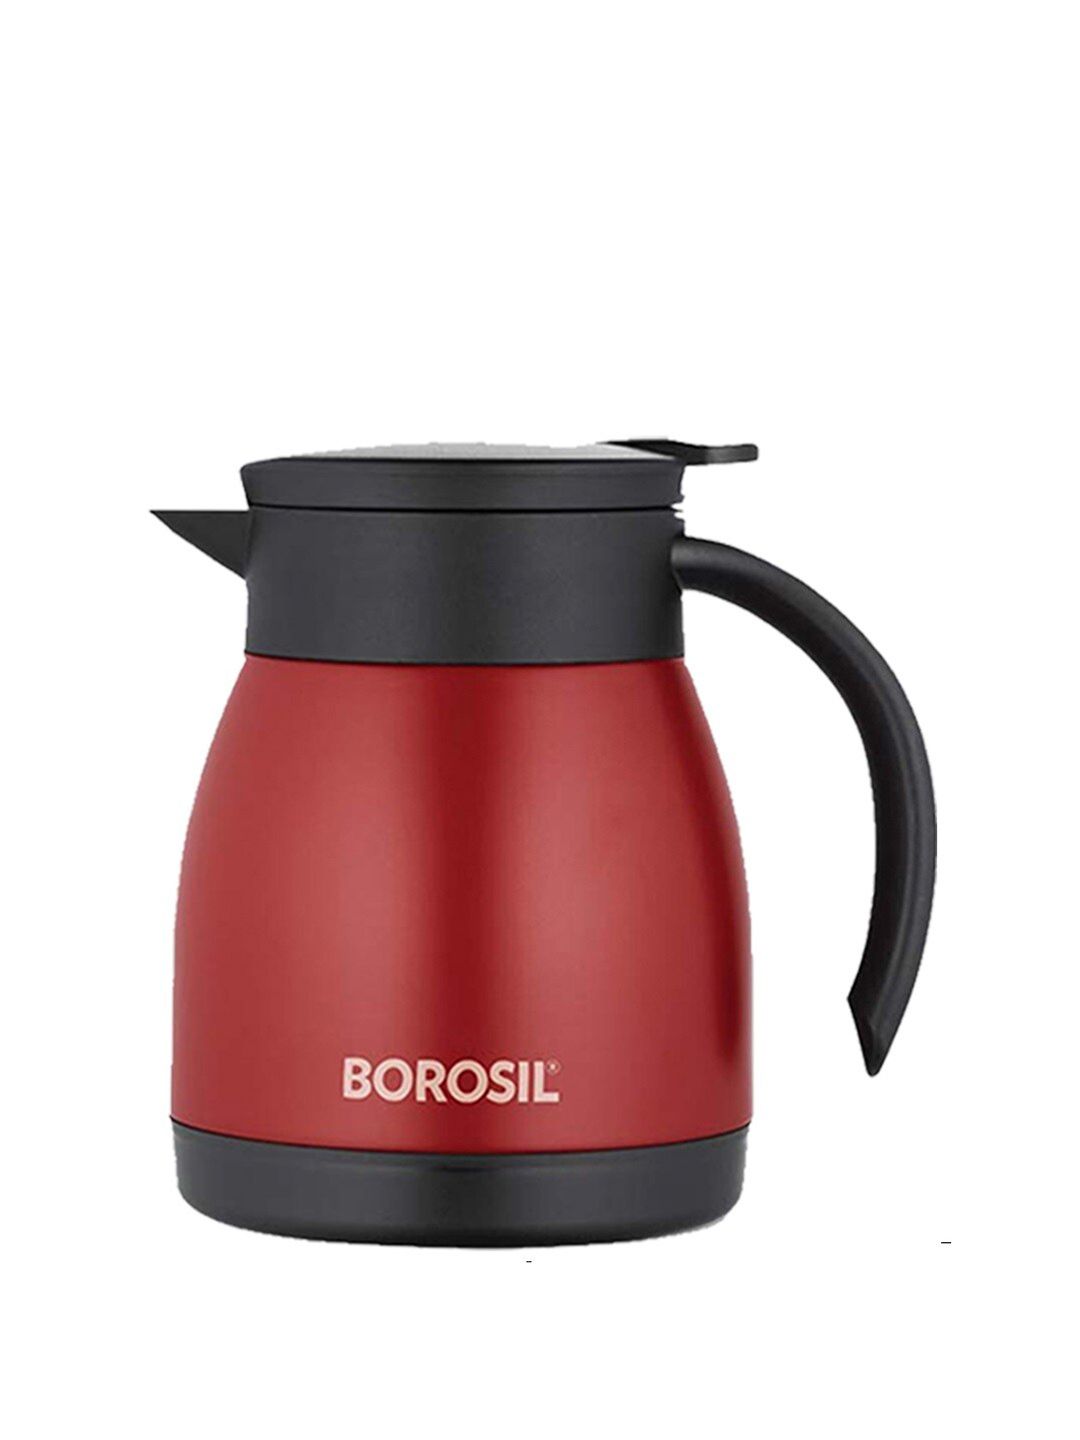 BOROSIL Red & Black Solid Stainless Steel Vacuum Insulated Teapot Price in India